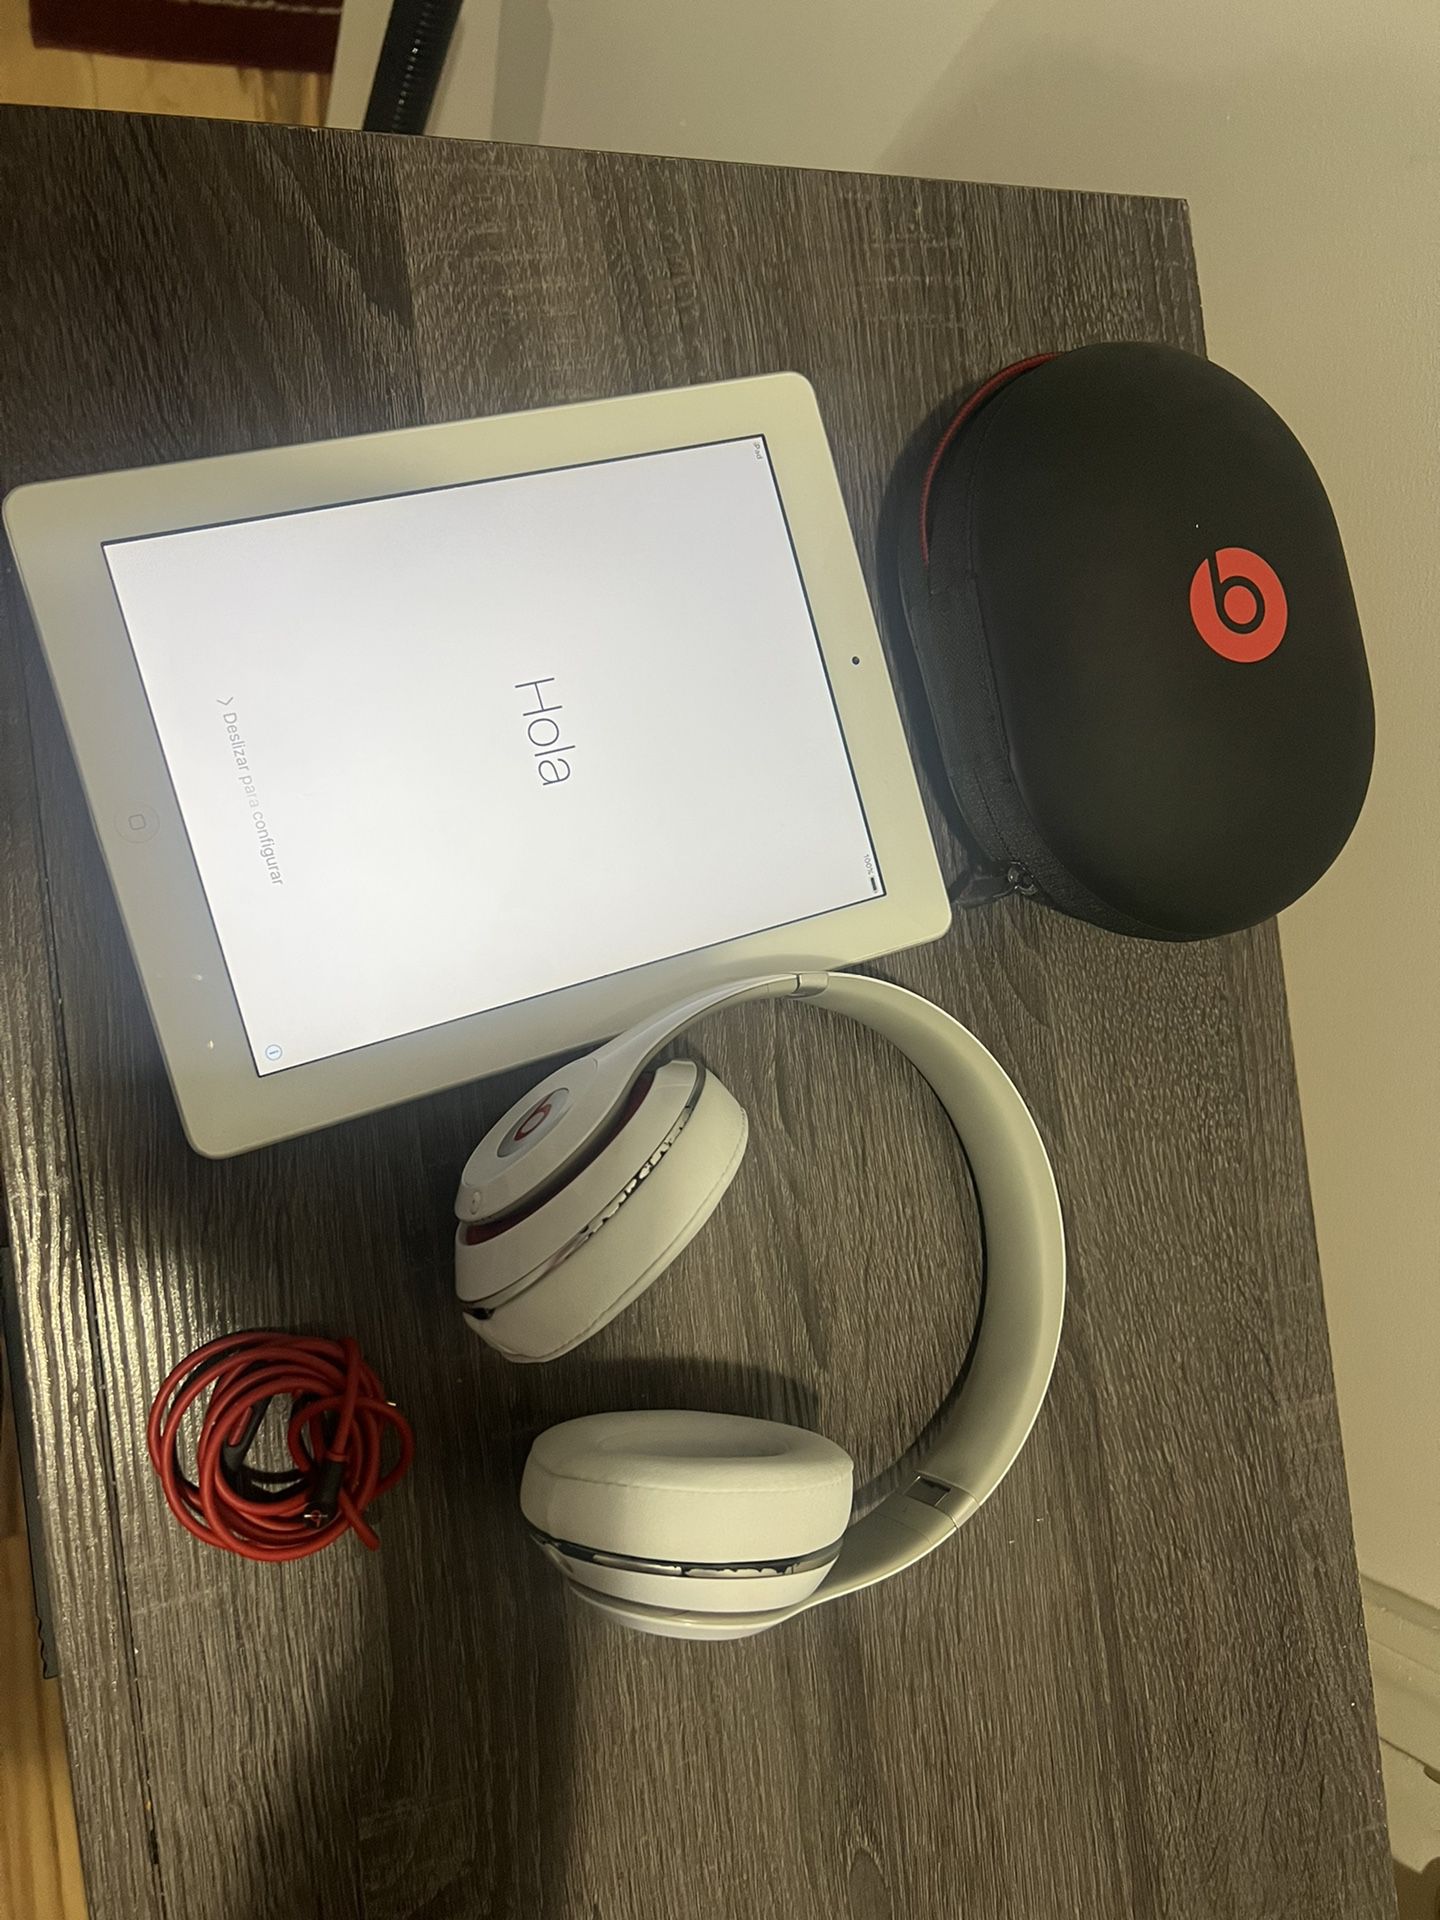 IPAD 2 With Beats By Dre Studio